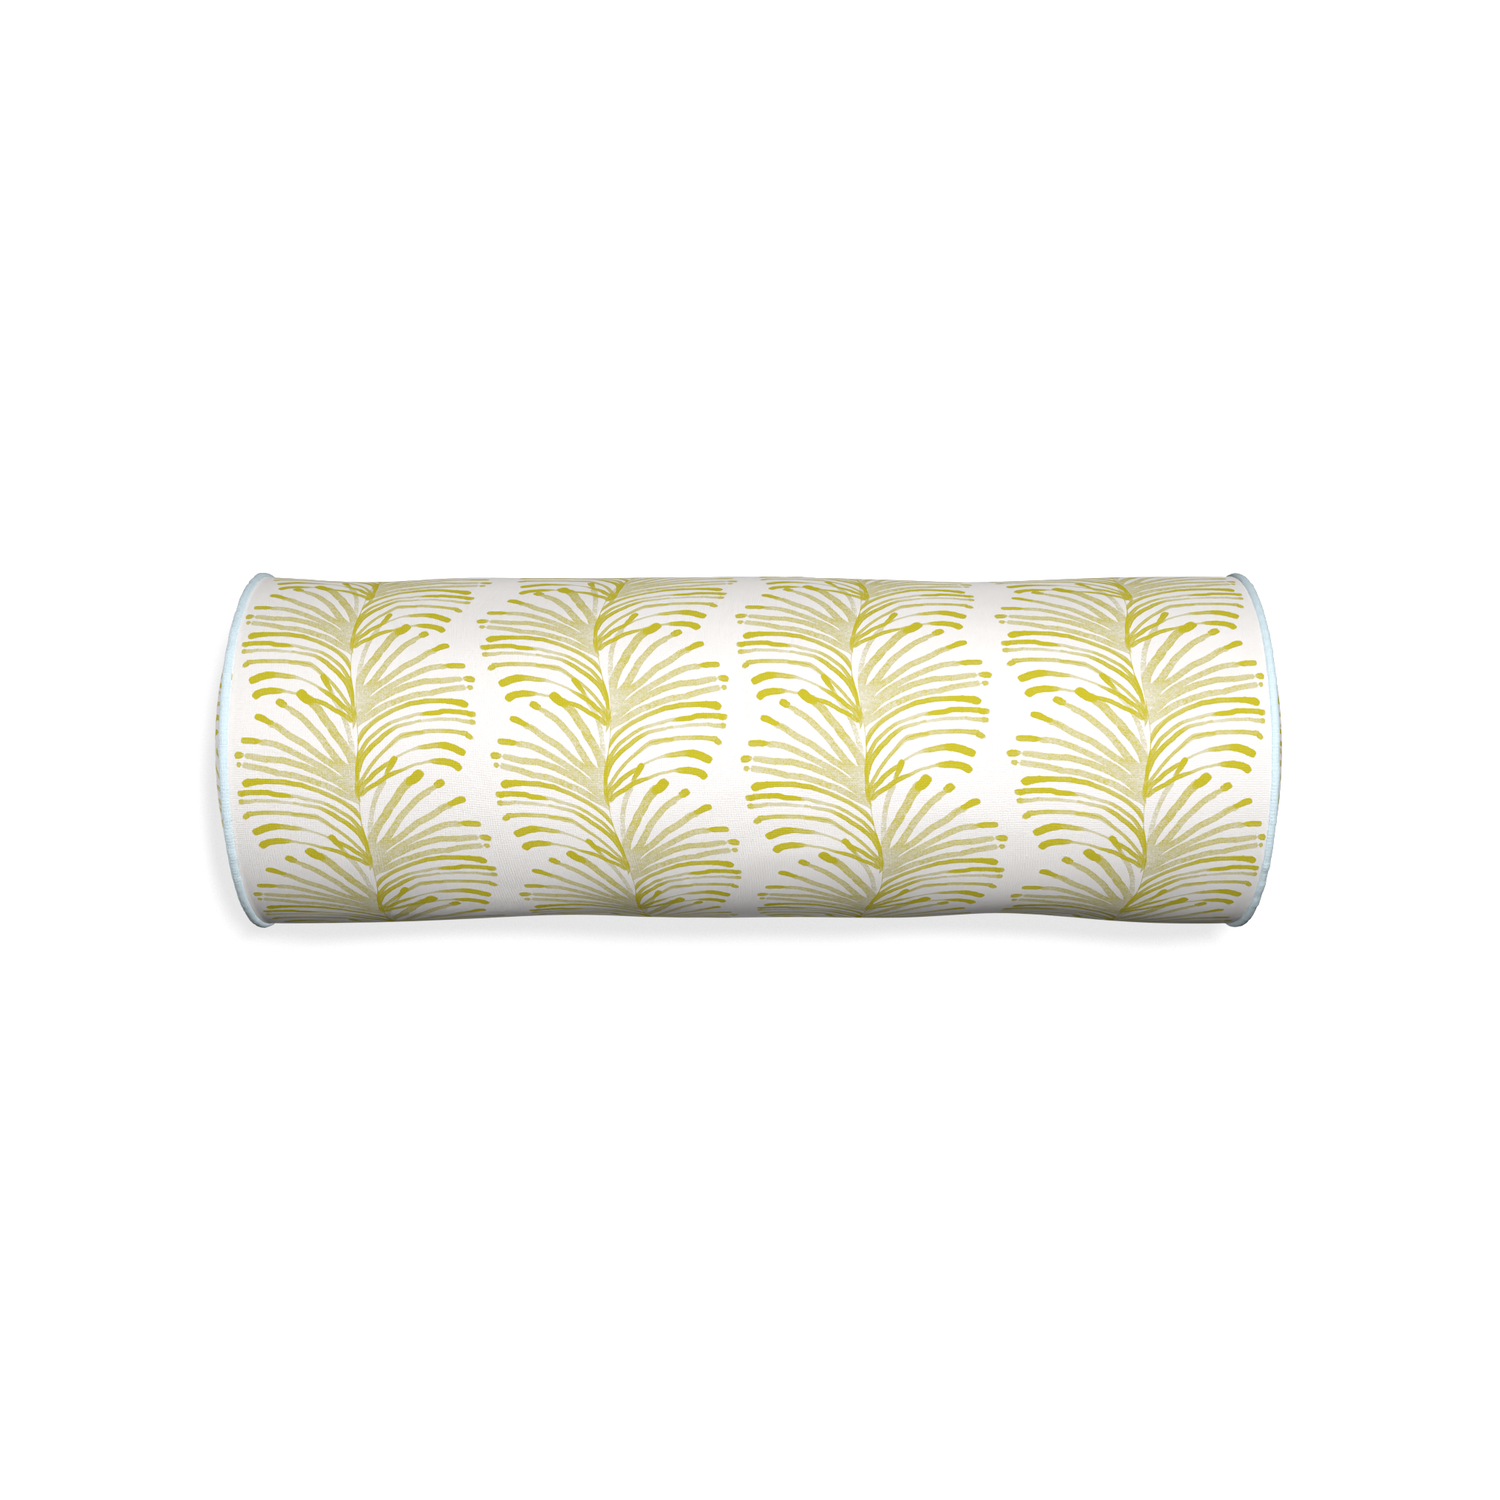 Bolster emma chartreuse custom pillow with powder piping on white background